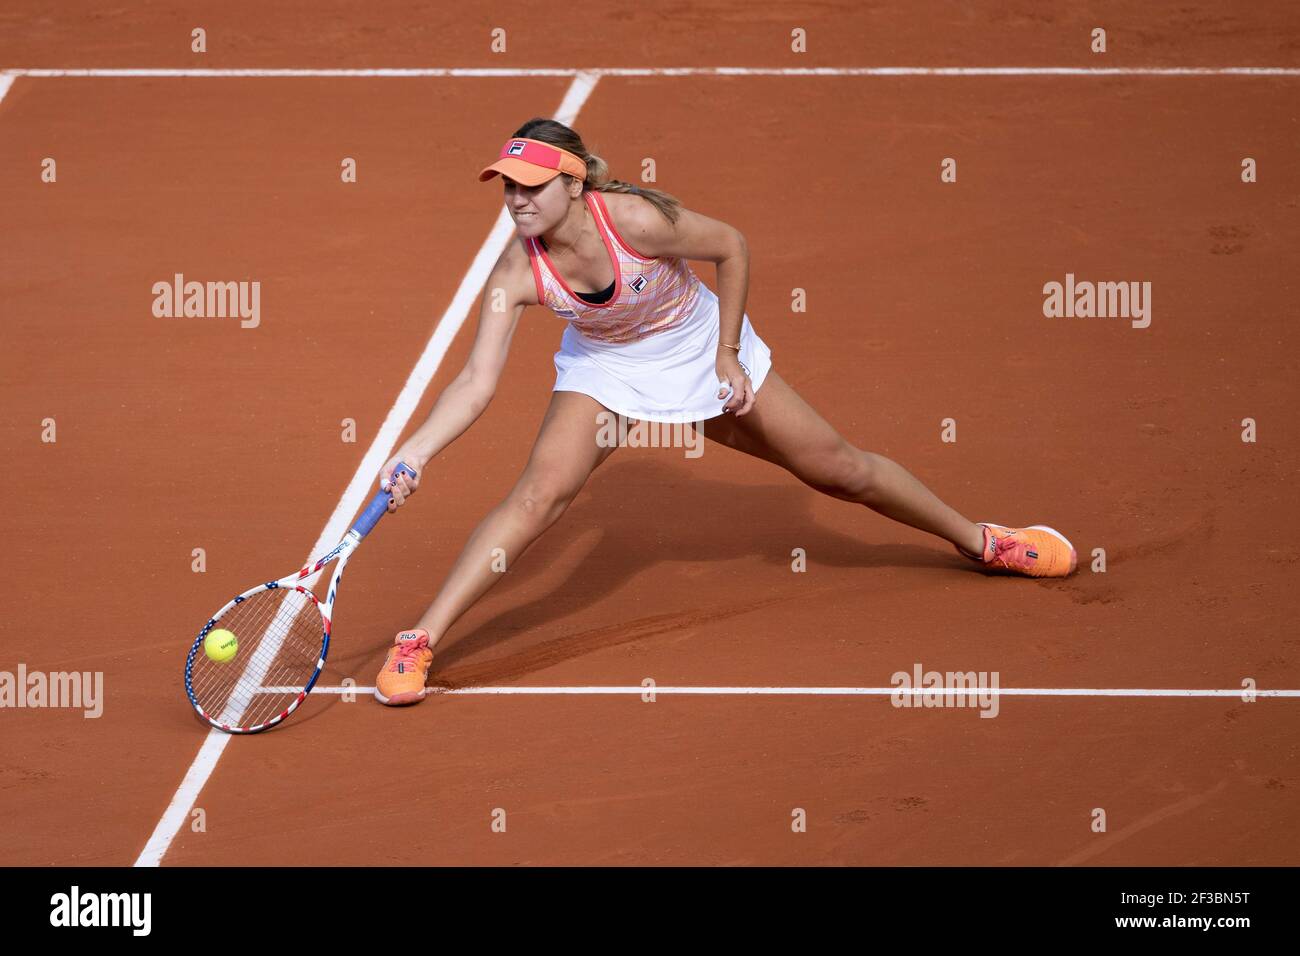 American tennis player Sofia Kenin playing a forehand volley during French Open 2020, Paris, France, Europe. Stock Photo